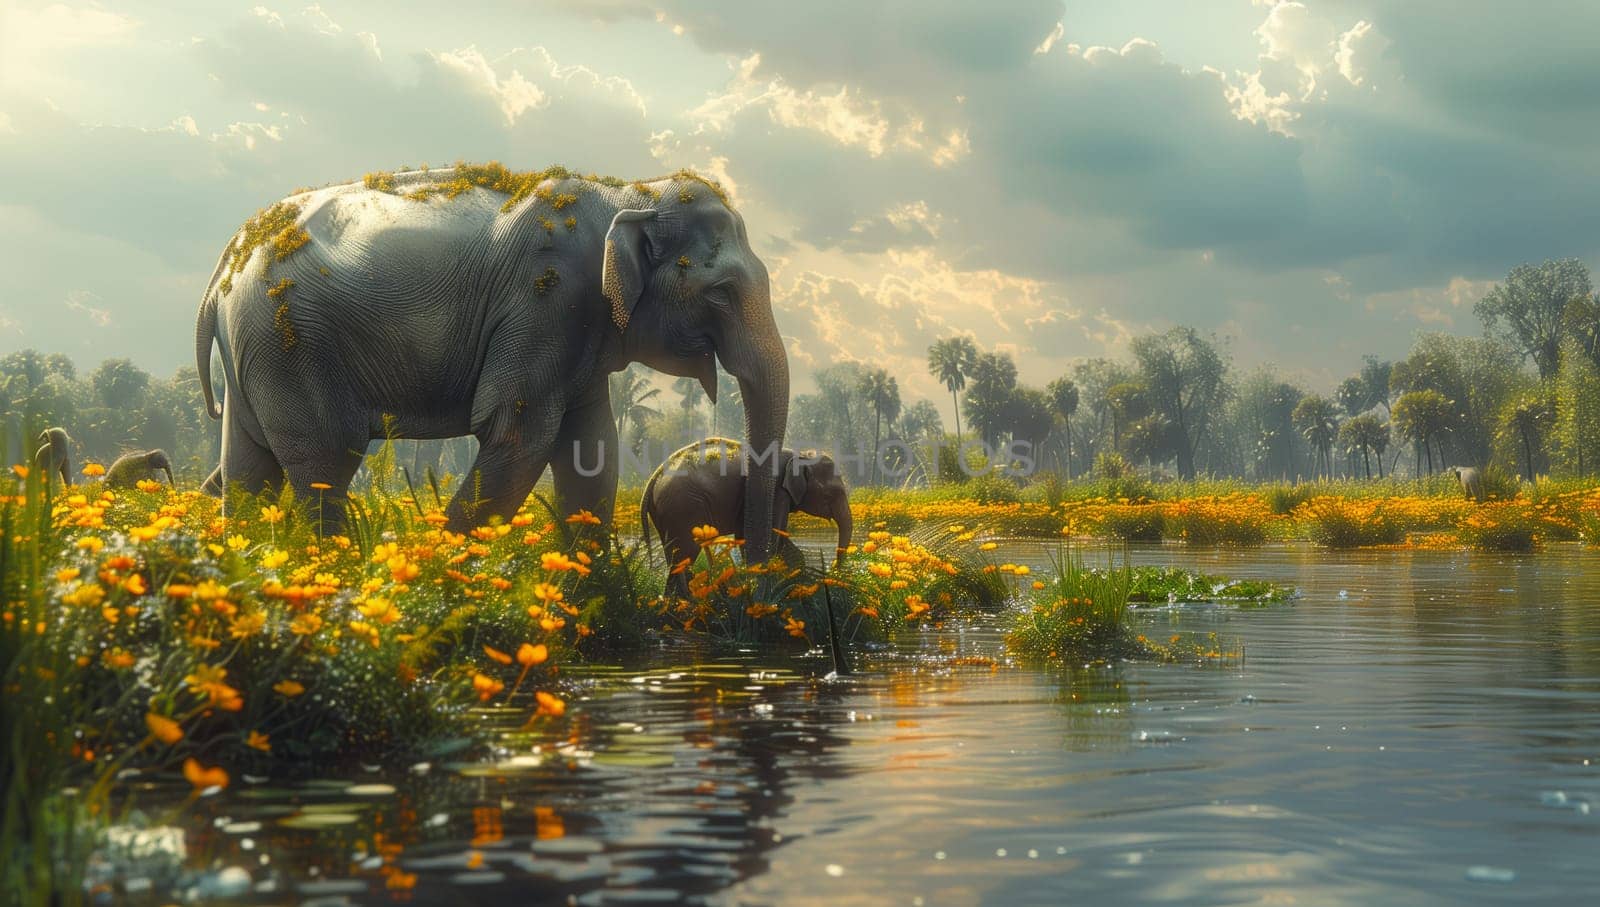 Elephants by water, sky reflecting in lake, trees nearby by richwolf